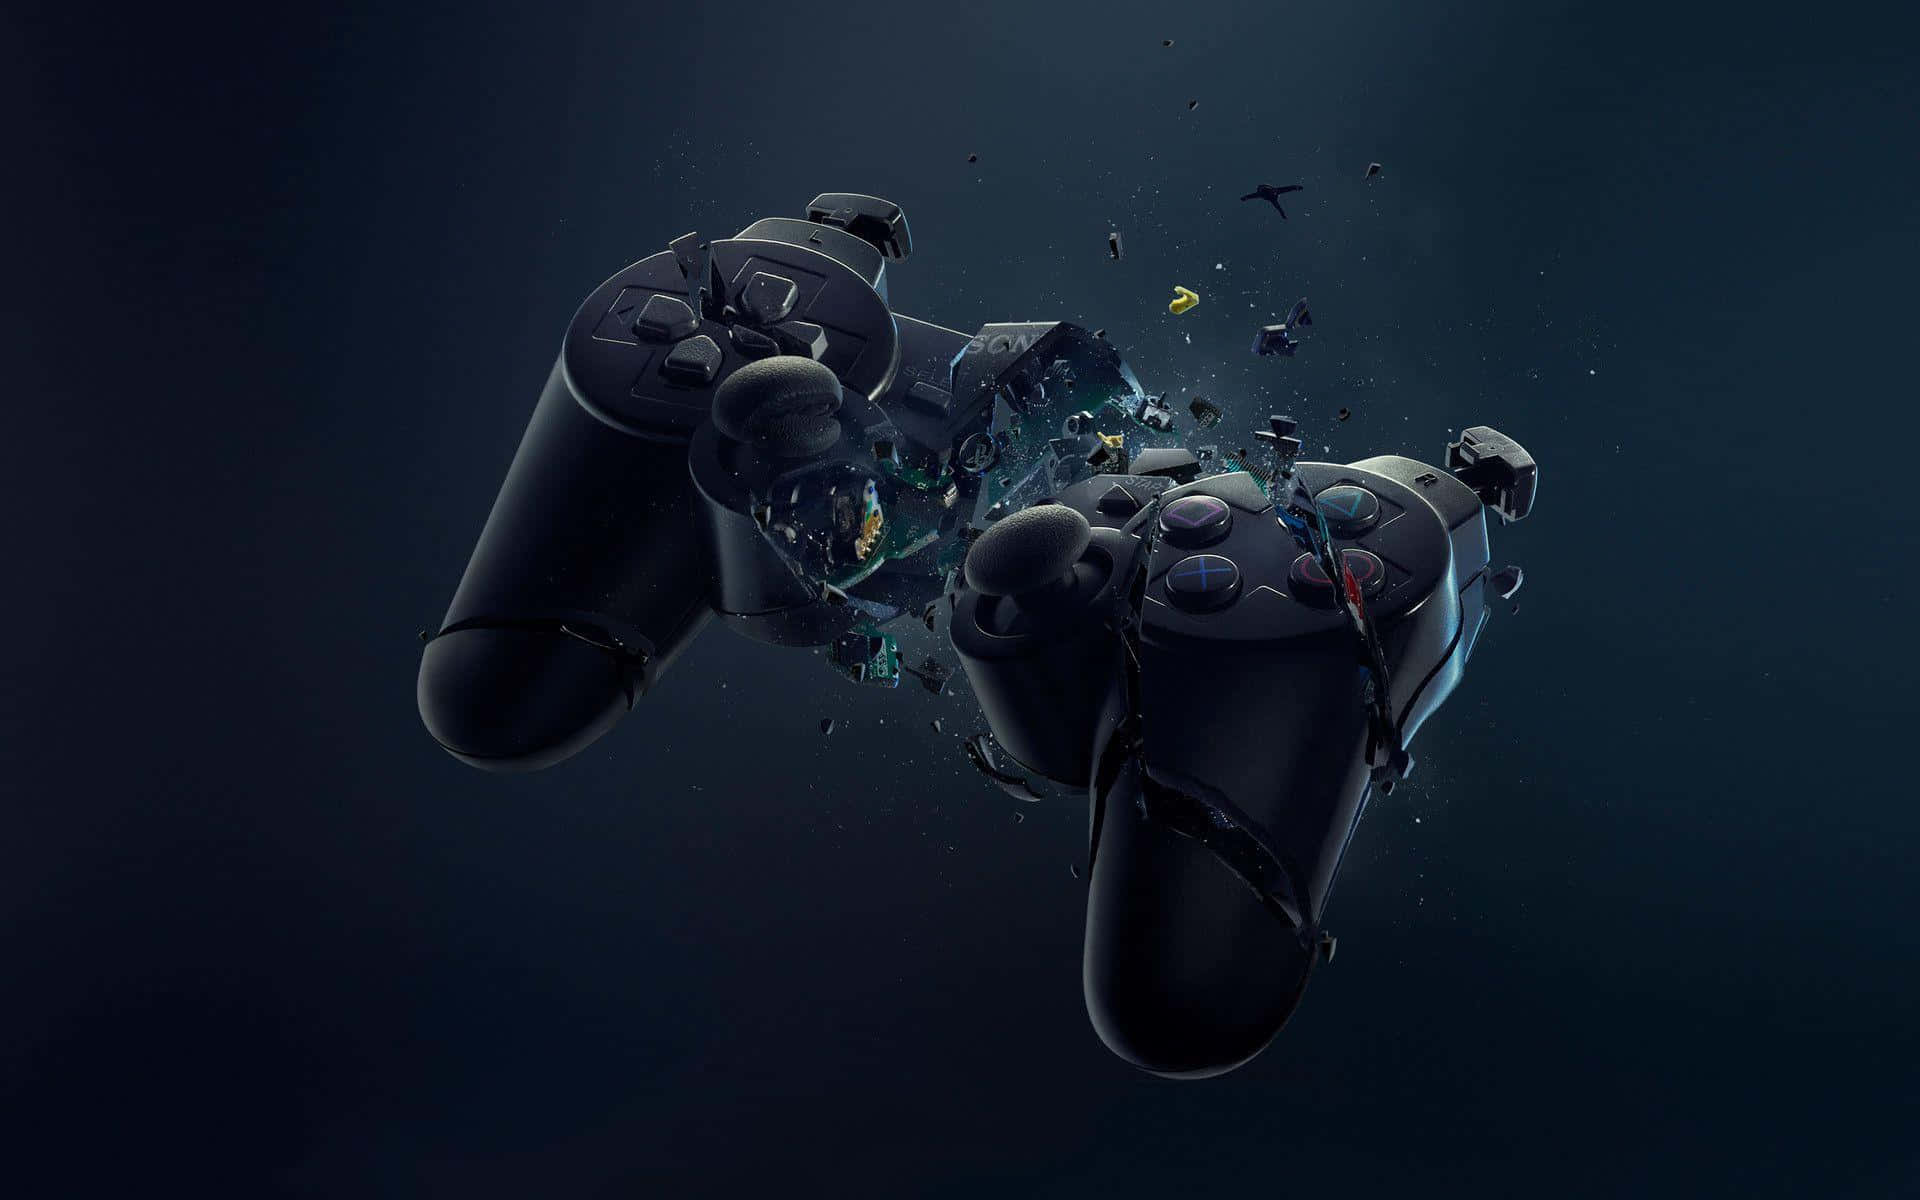 Experience spectacular gaming with the Sony PlayStation